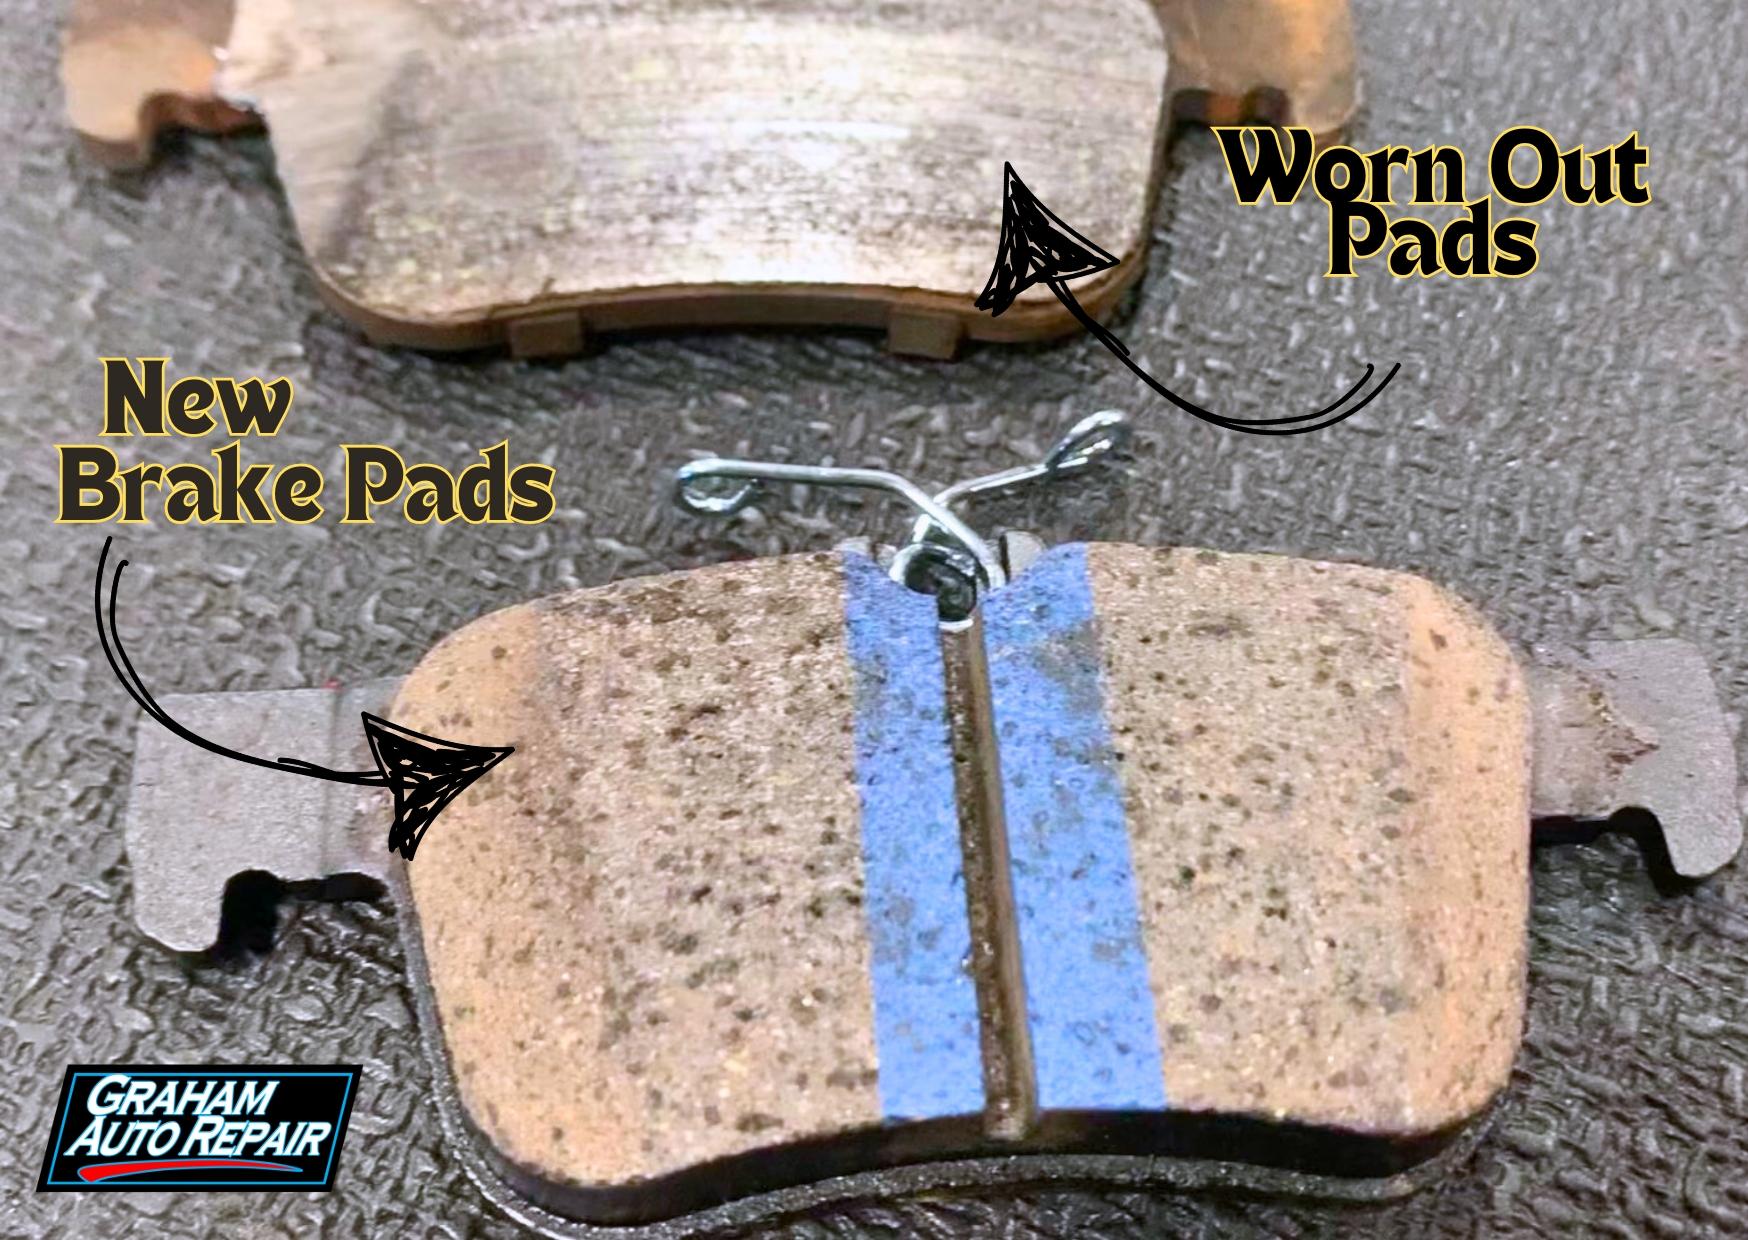 The difference between new and worn out brake pads